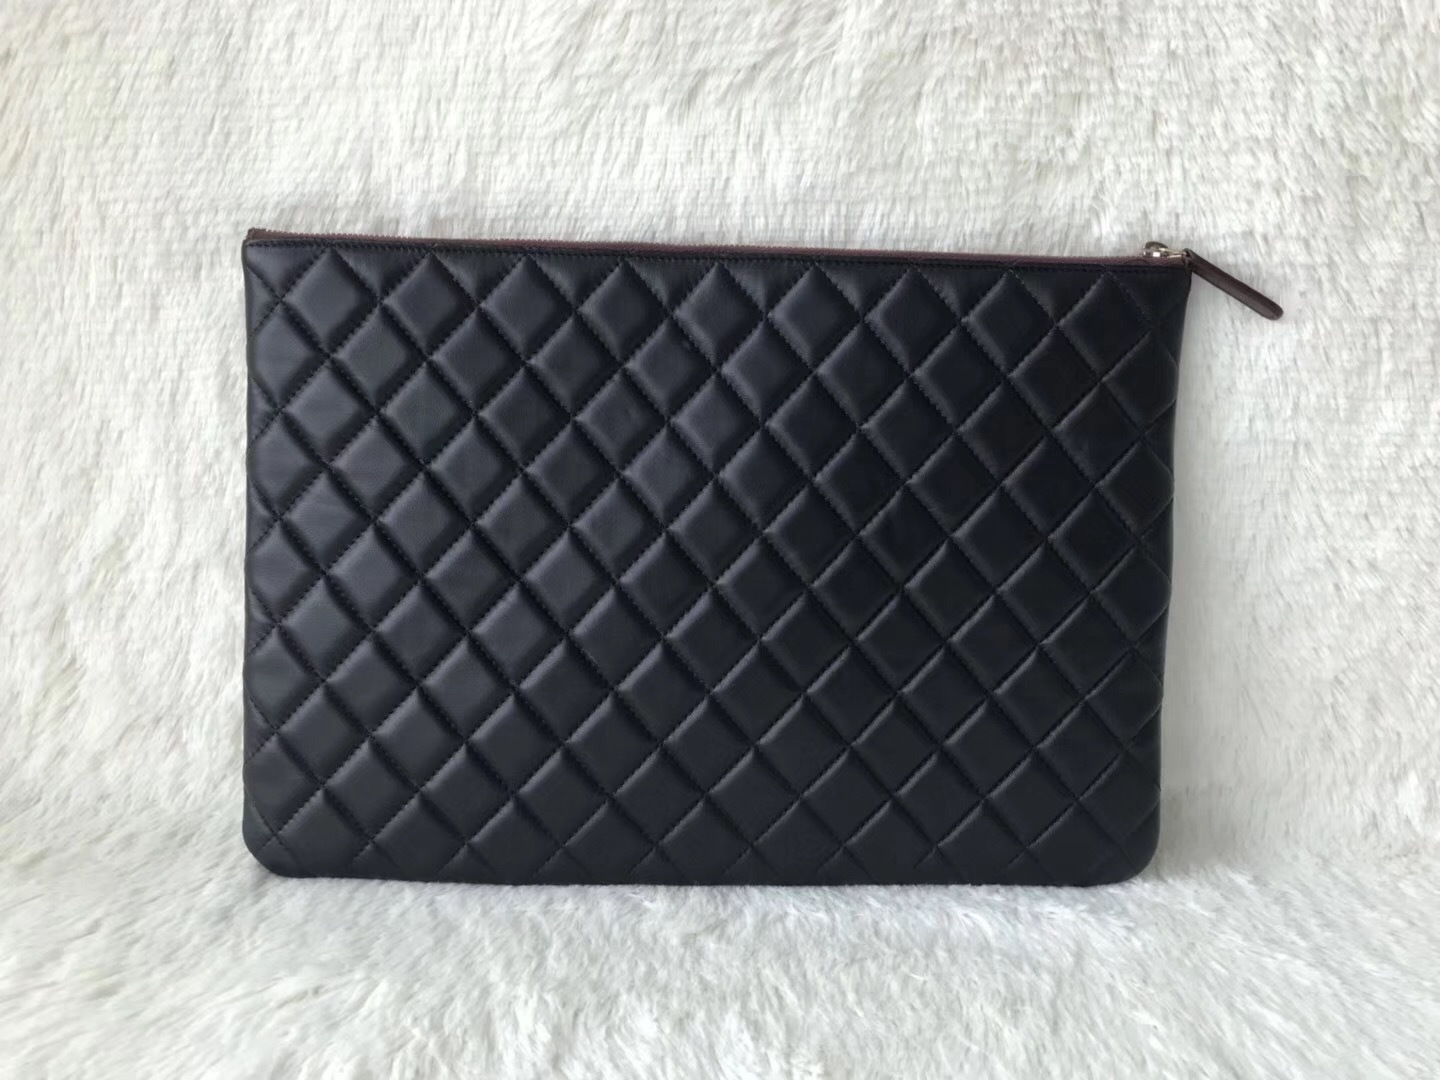 AUTHENTIC CHANEL Black Quilted Lambskin Large Clutch Bag GHW - $999.00